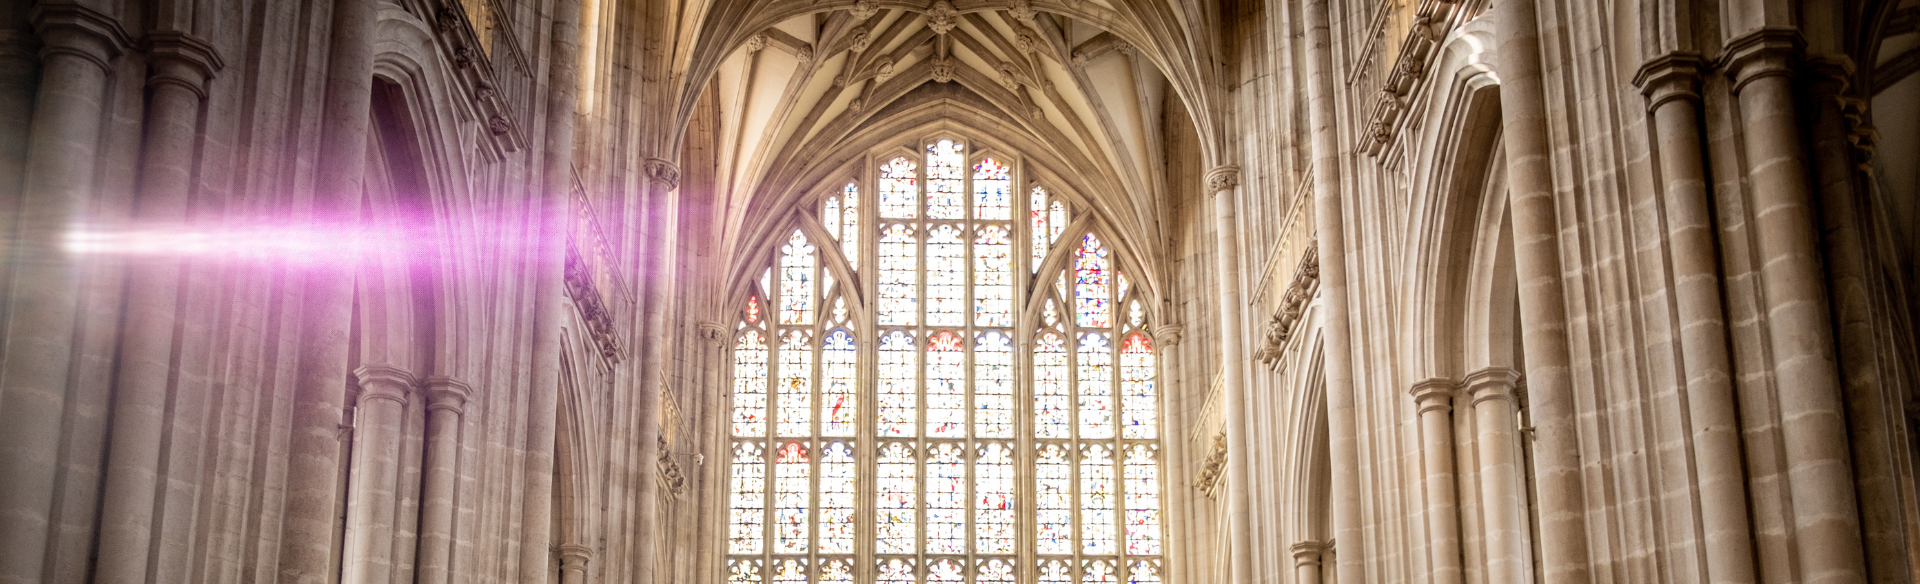 5 best english cathedrals